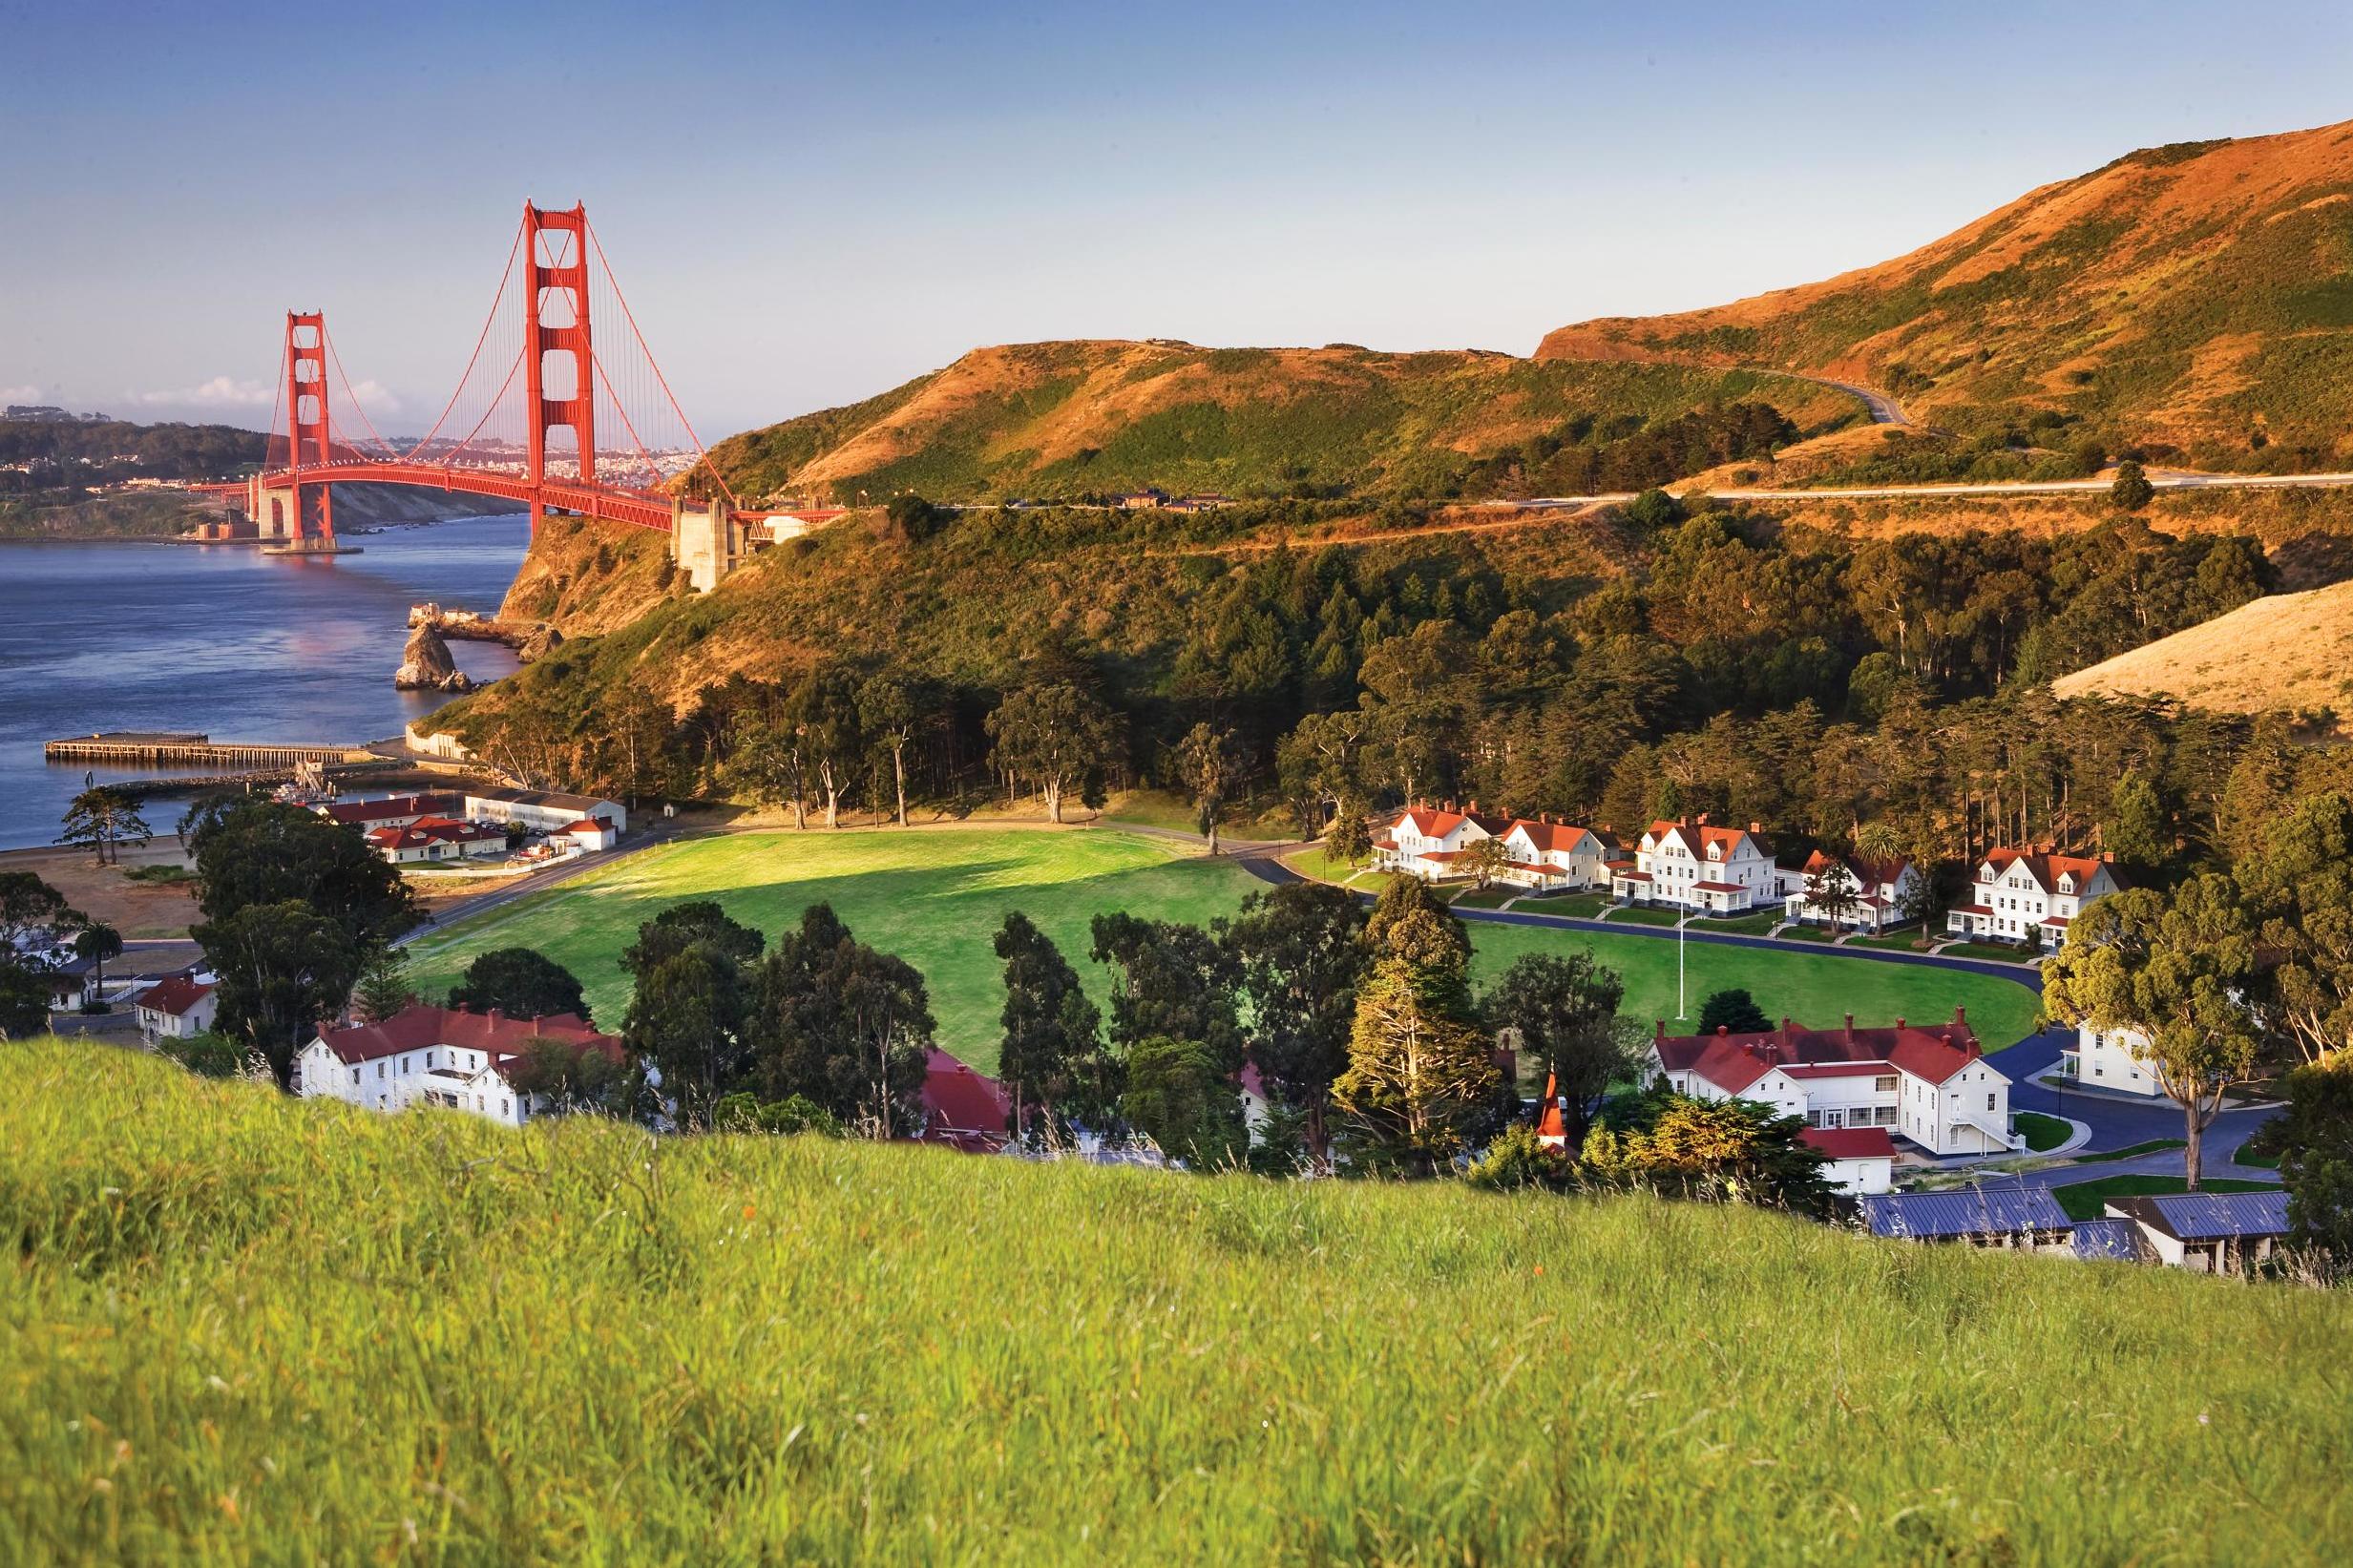 Cross the bridge and get back to nature at Cavallo Point